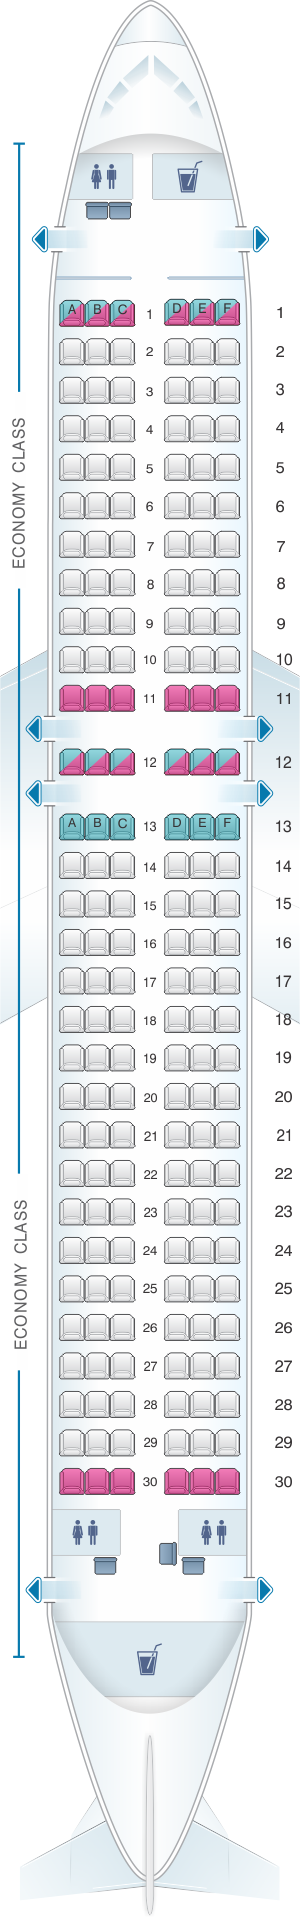 Seat map for Monarch Airlines Airbus A320 200